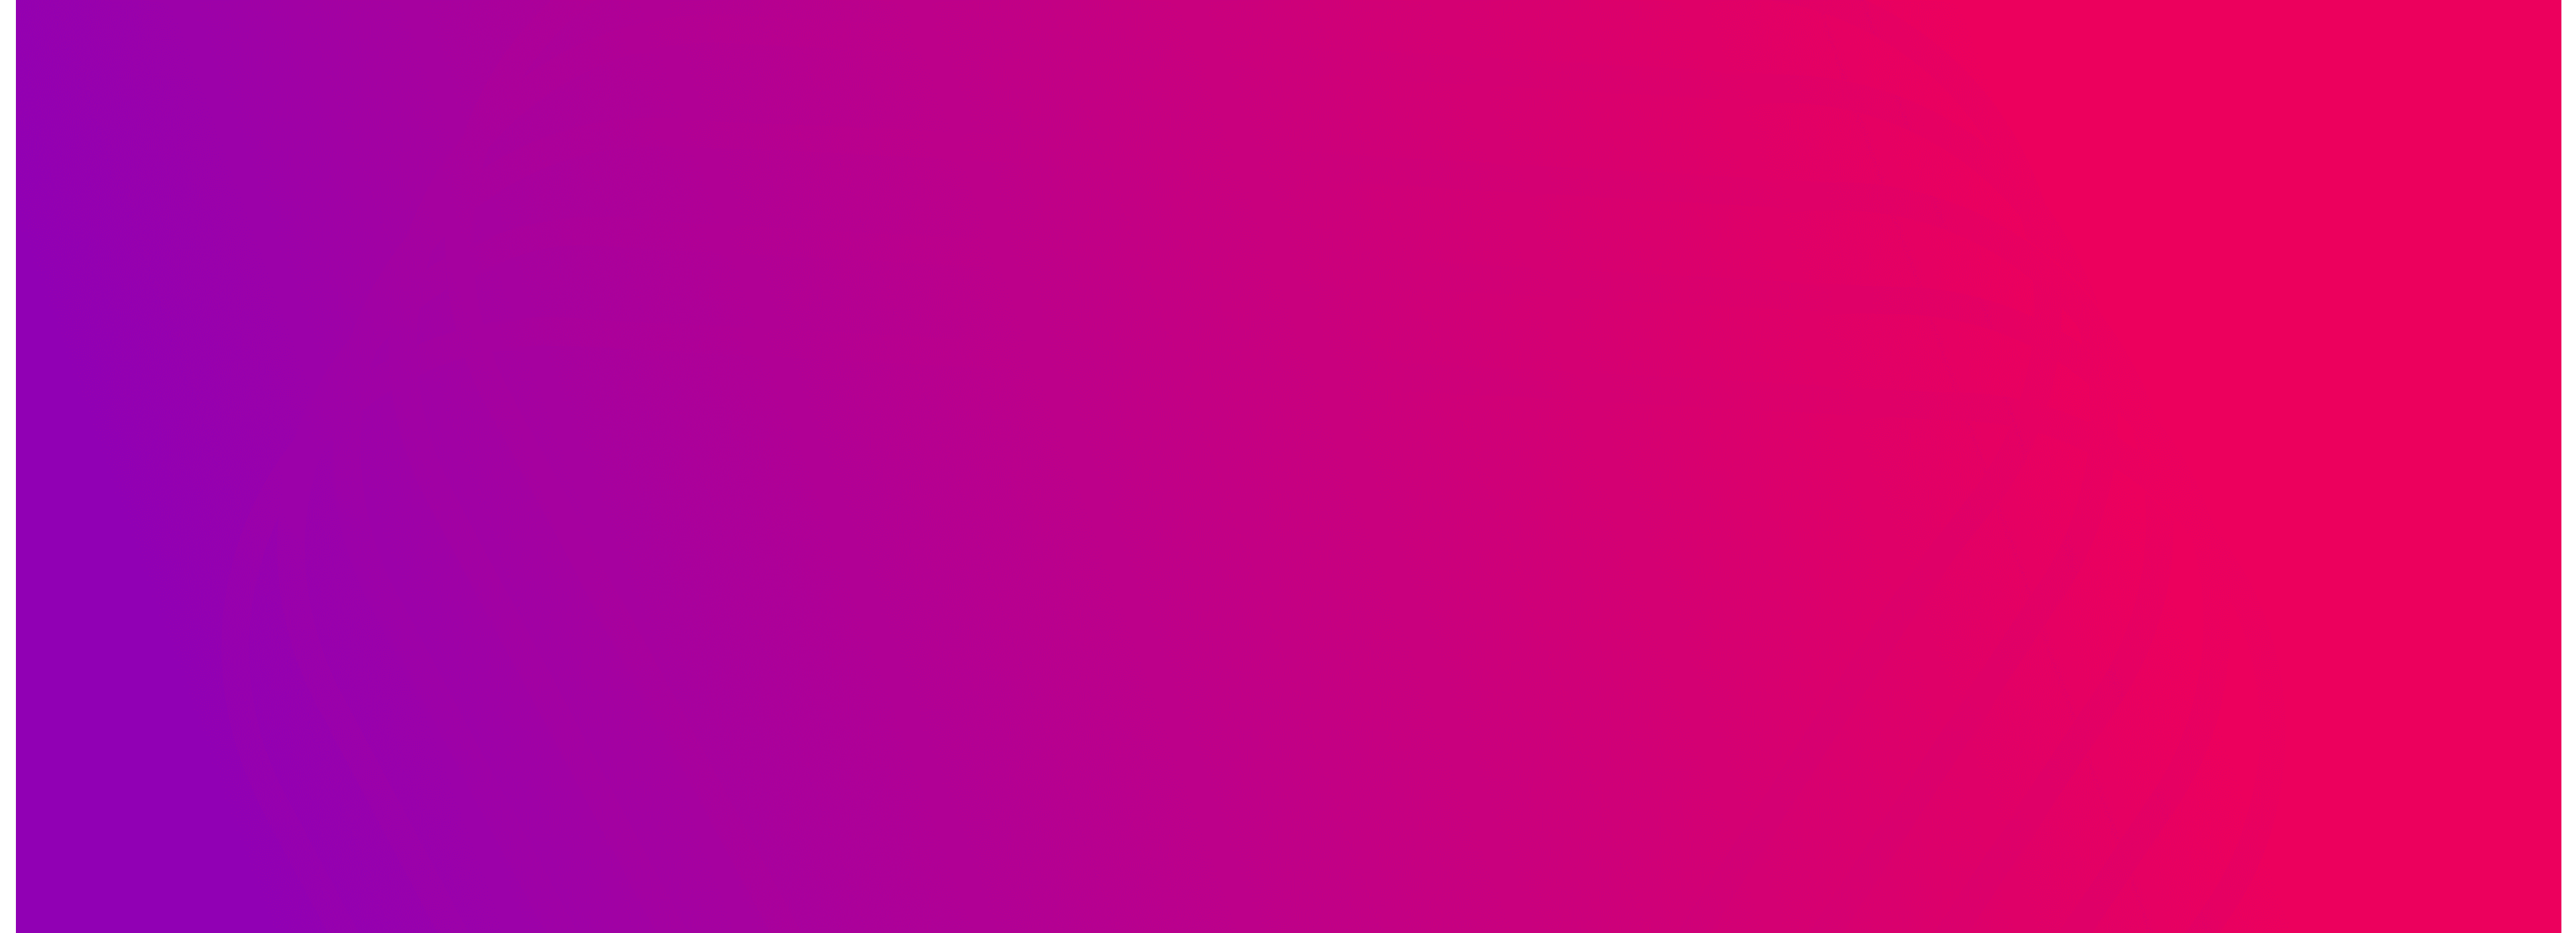 Purple/pink background gradient with a faint Appear logo visible